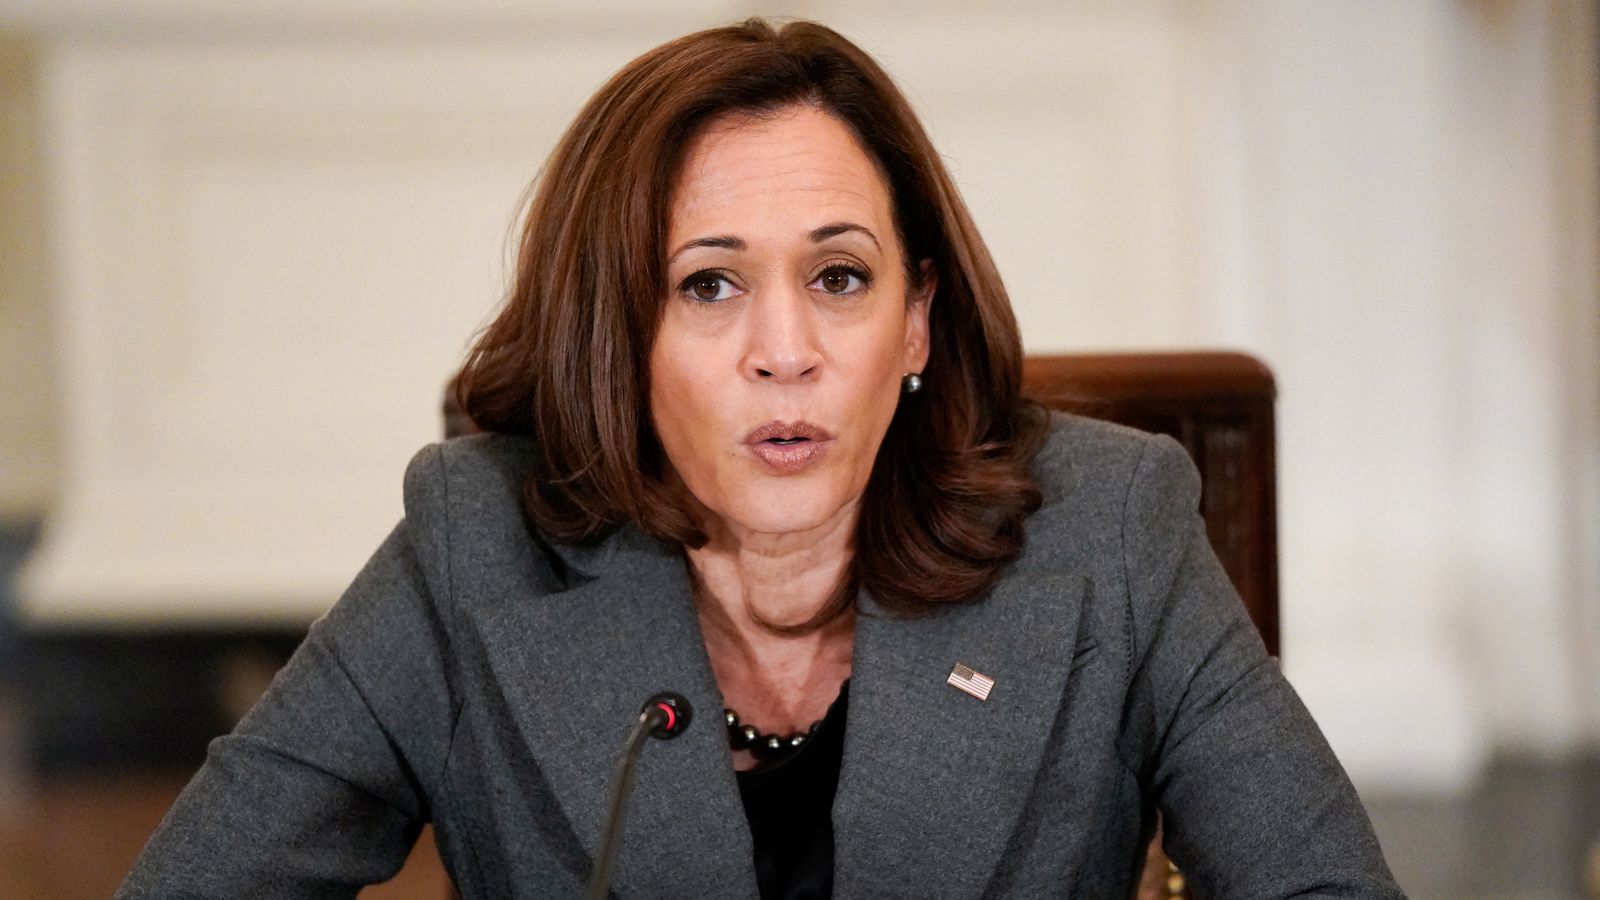 US vice president Kamala Harris involved in car accident which Secret Service initially described as a 'mechanical failure' - Sky News